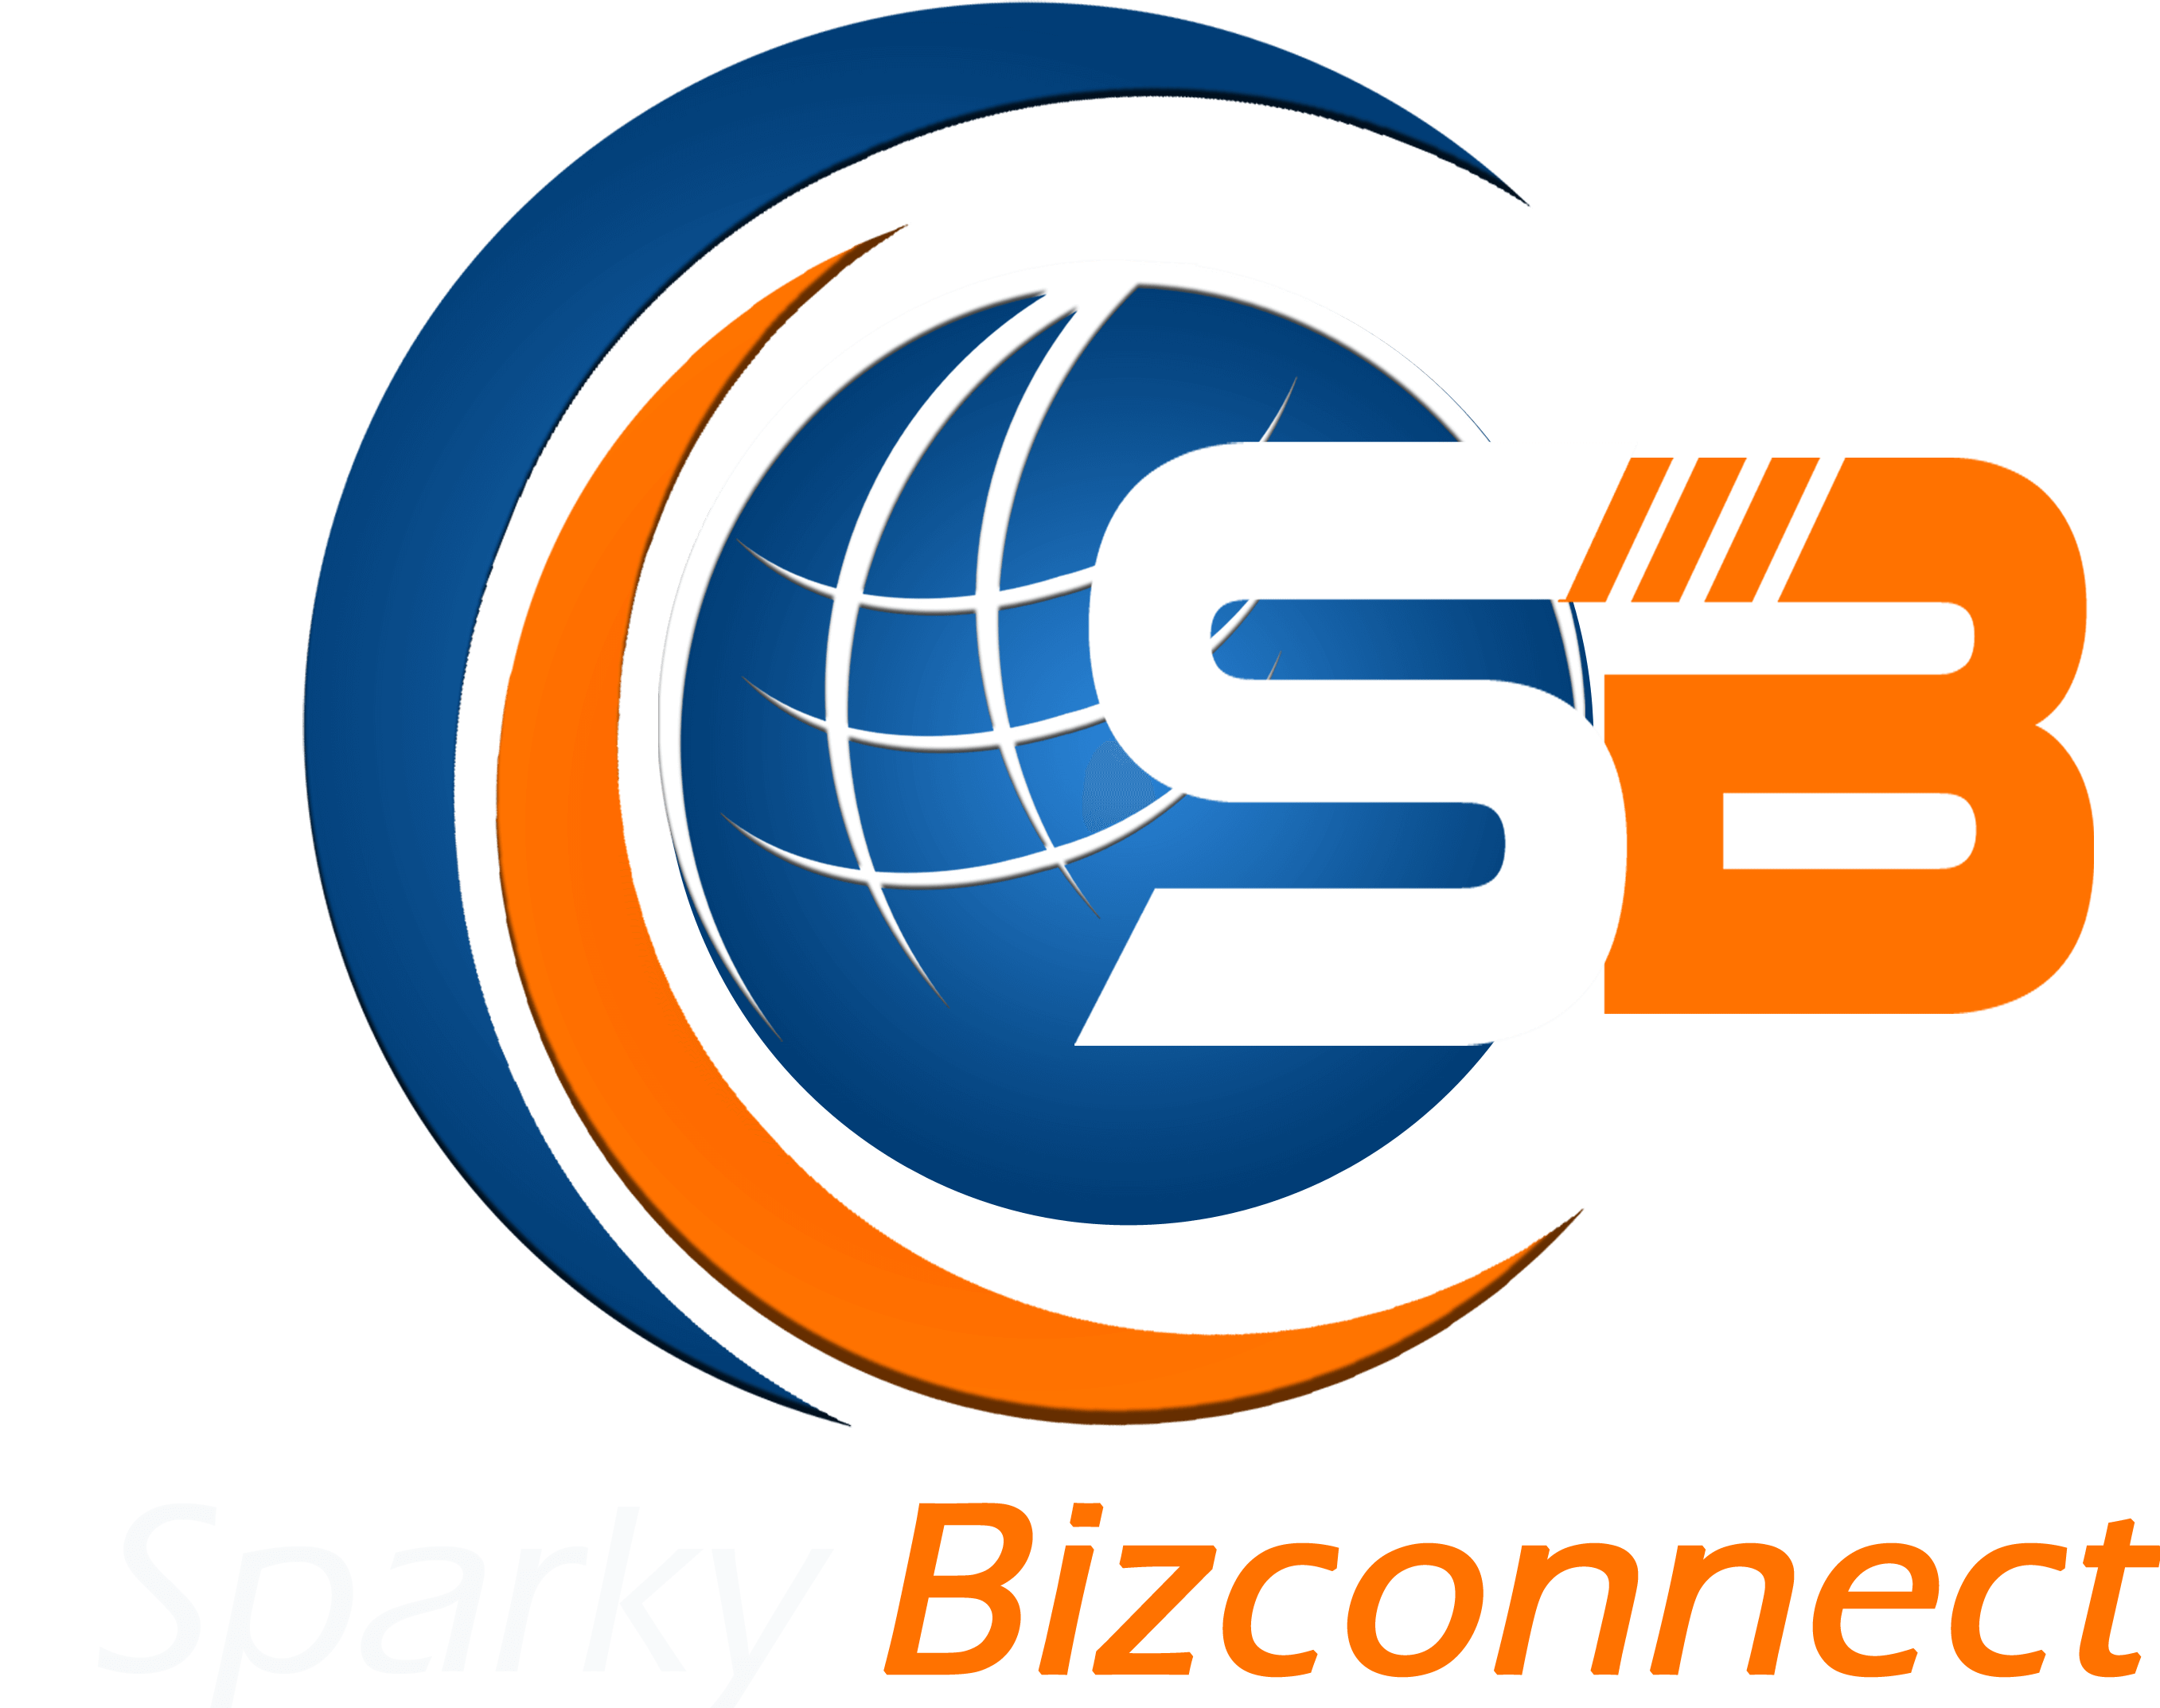 Sparky Logo - Sparky Bizconnect: Business Setup, Financing & Consulting in India